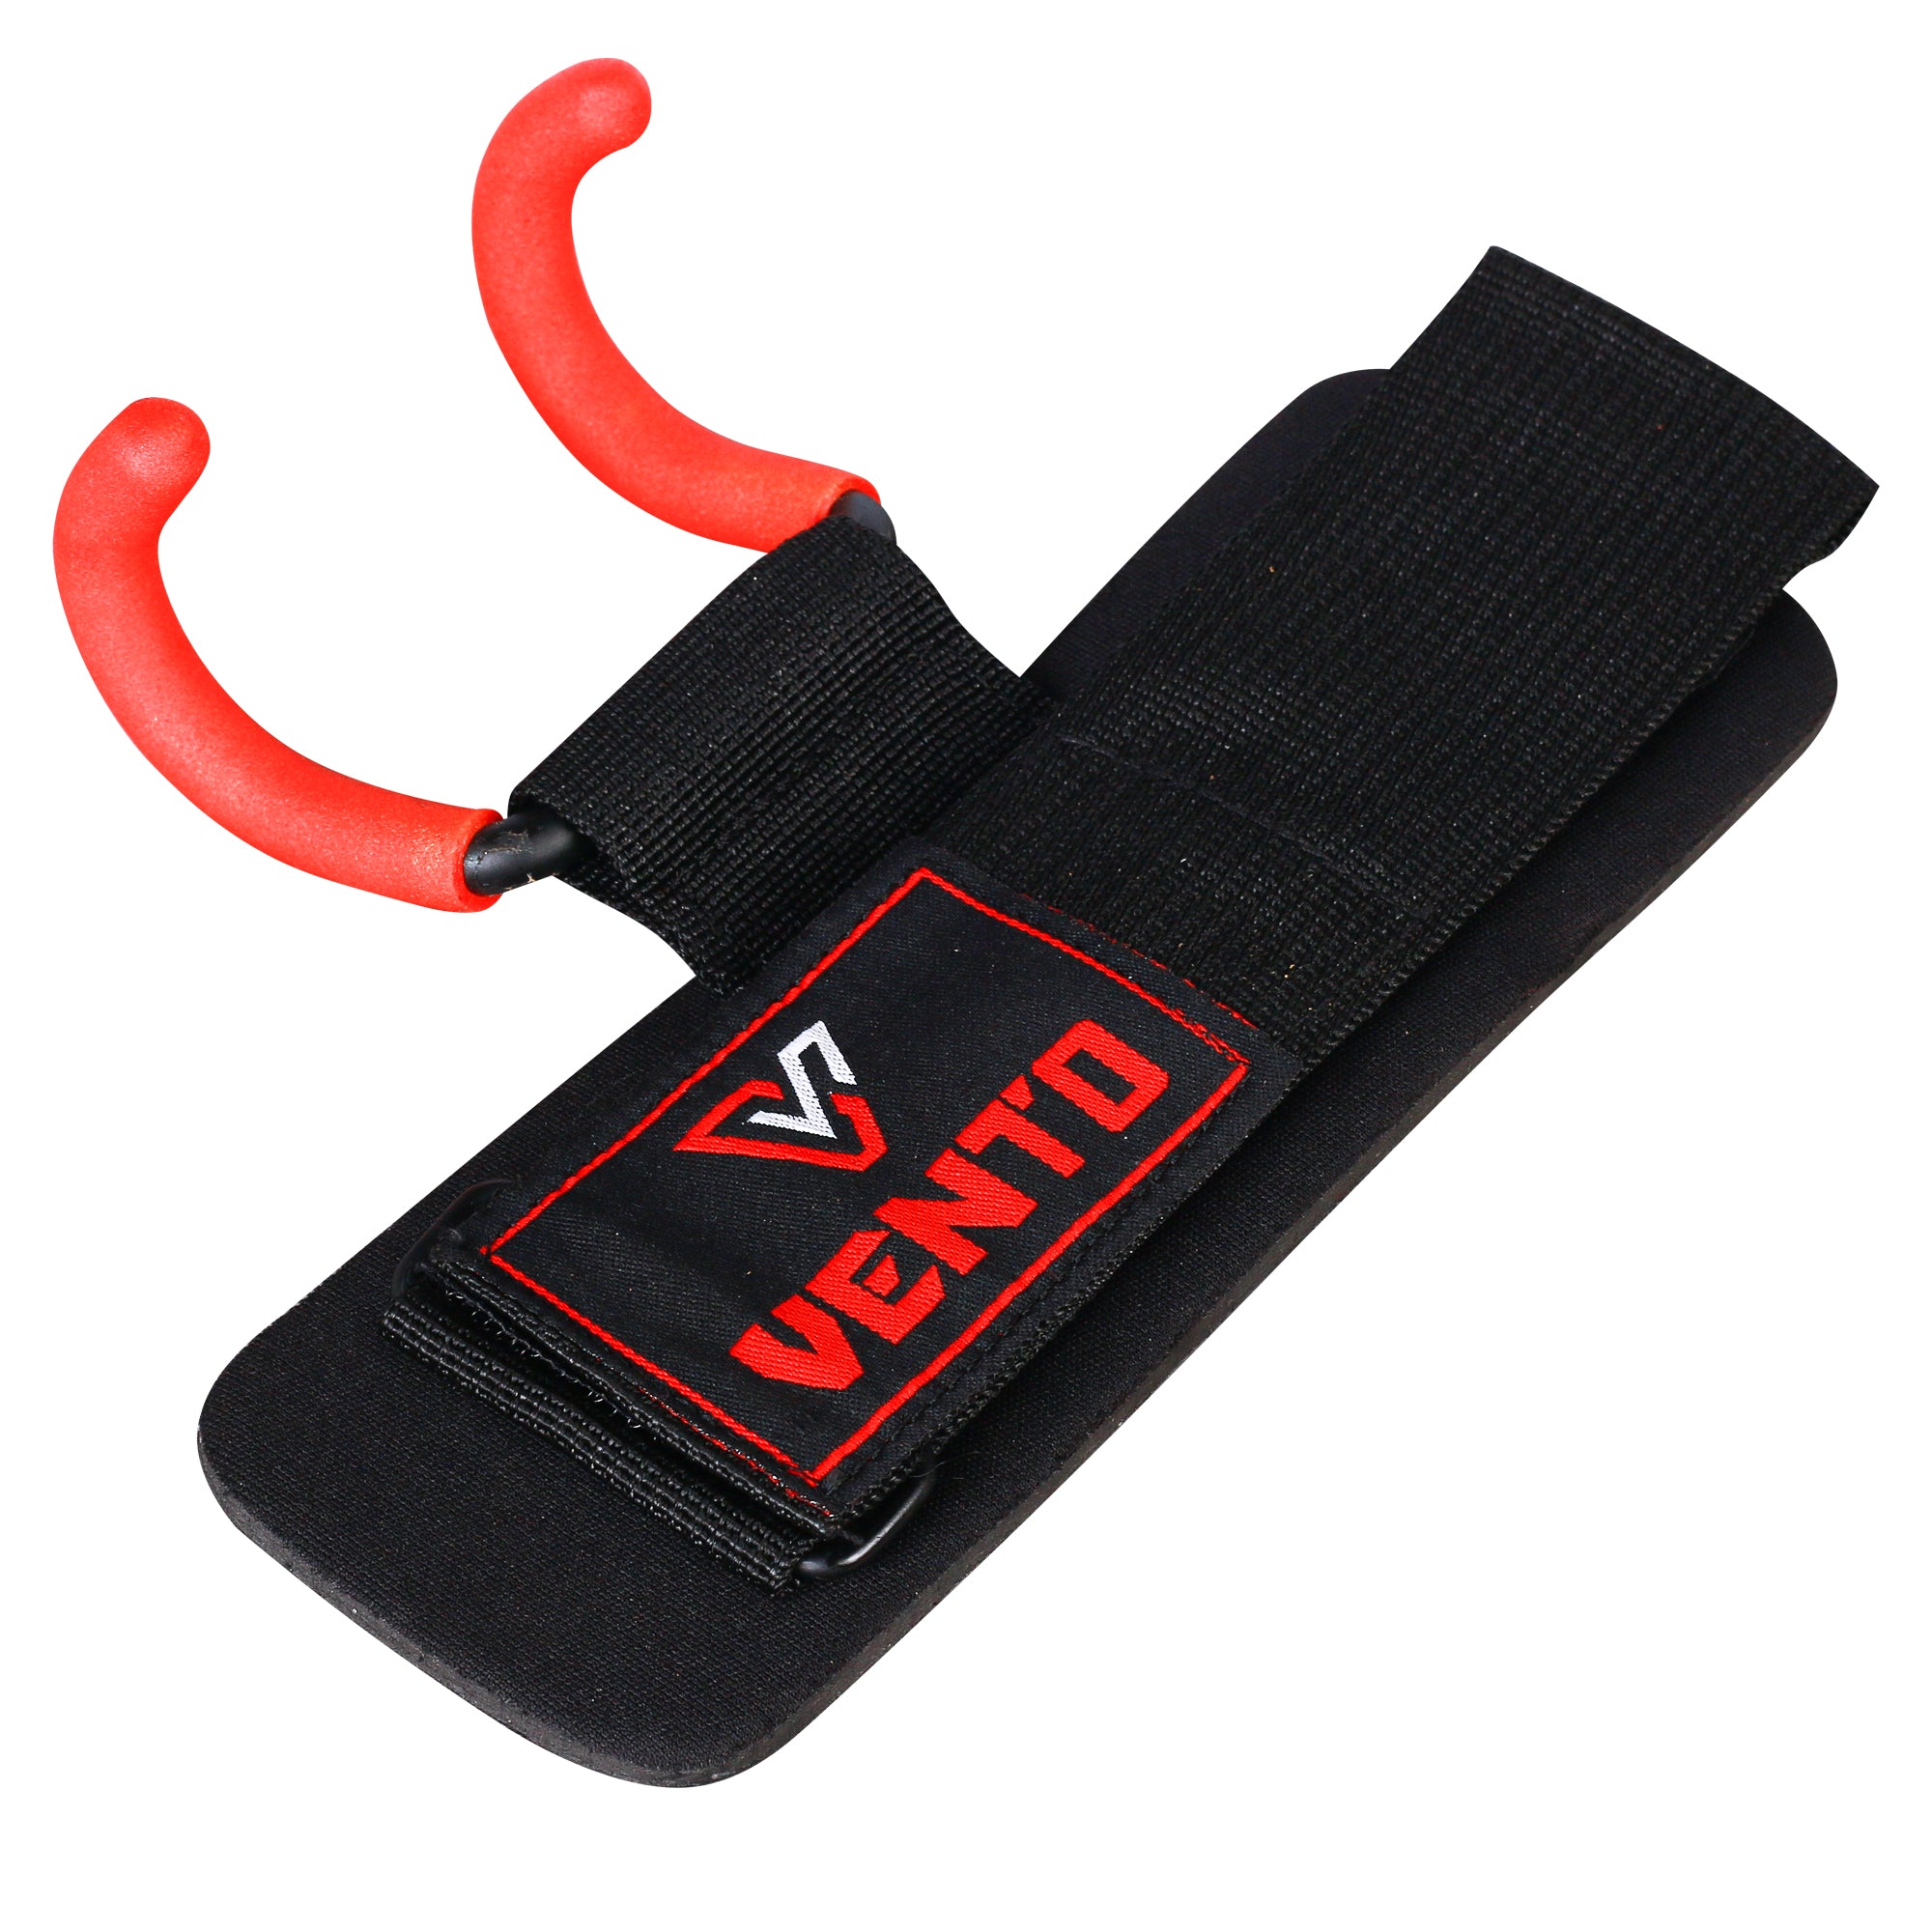 Vento weight lifting hook